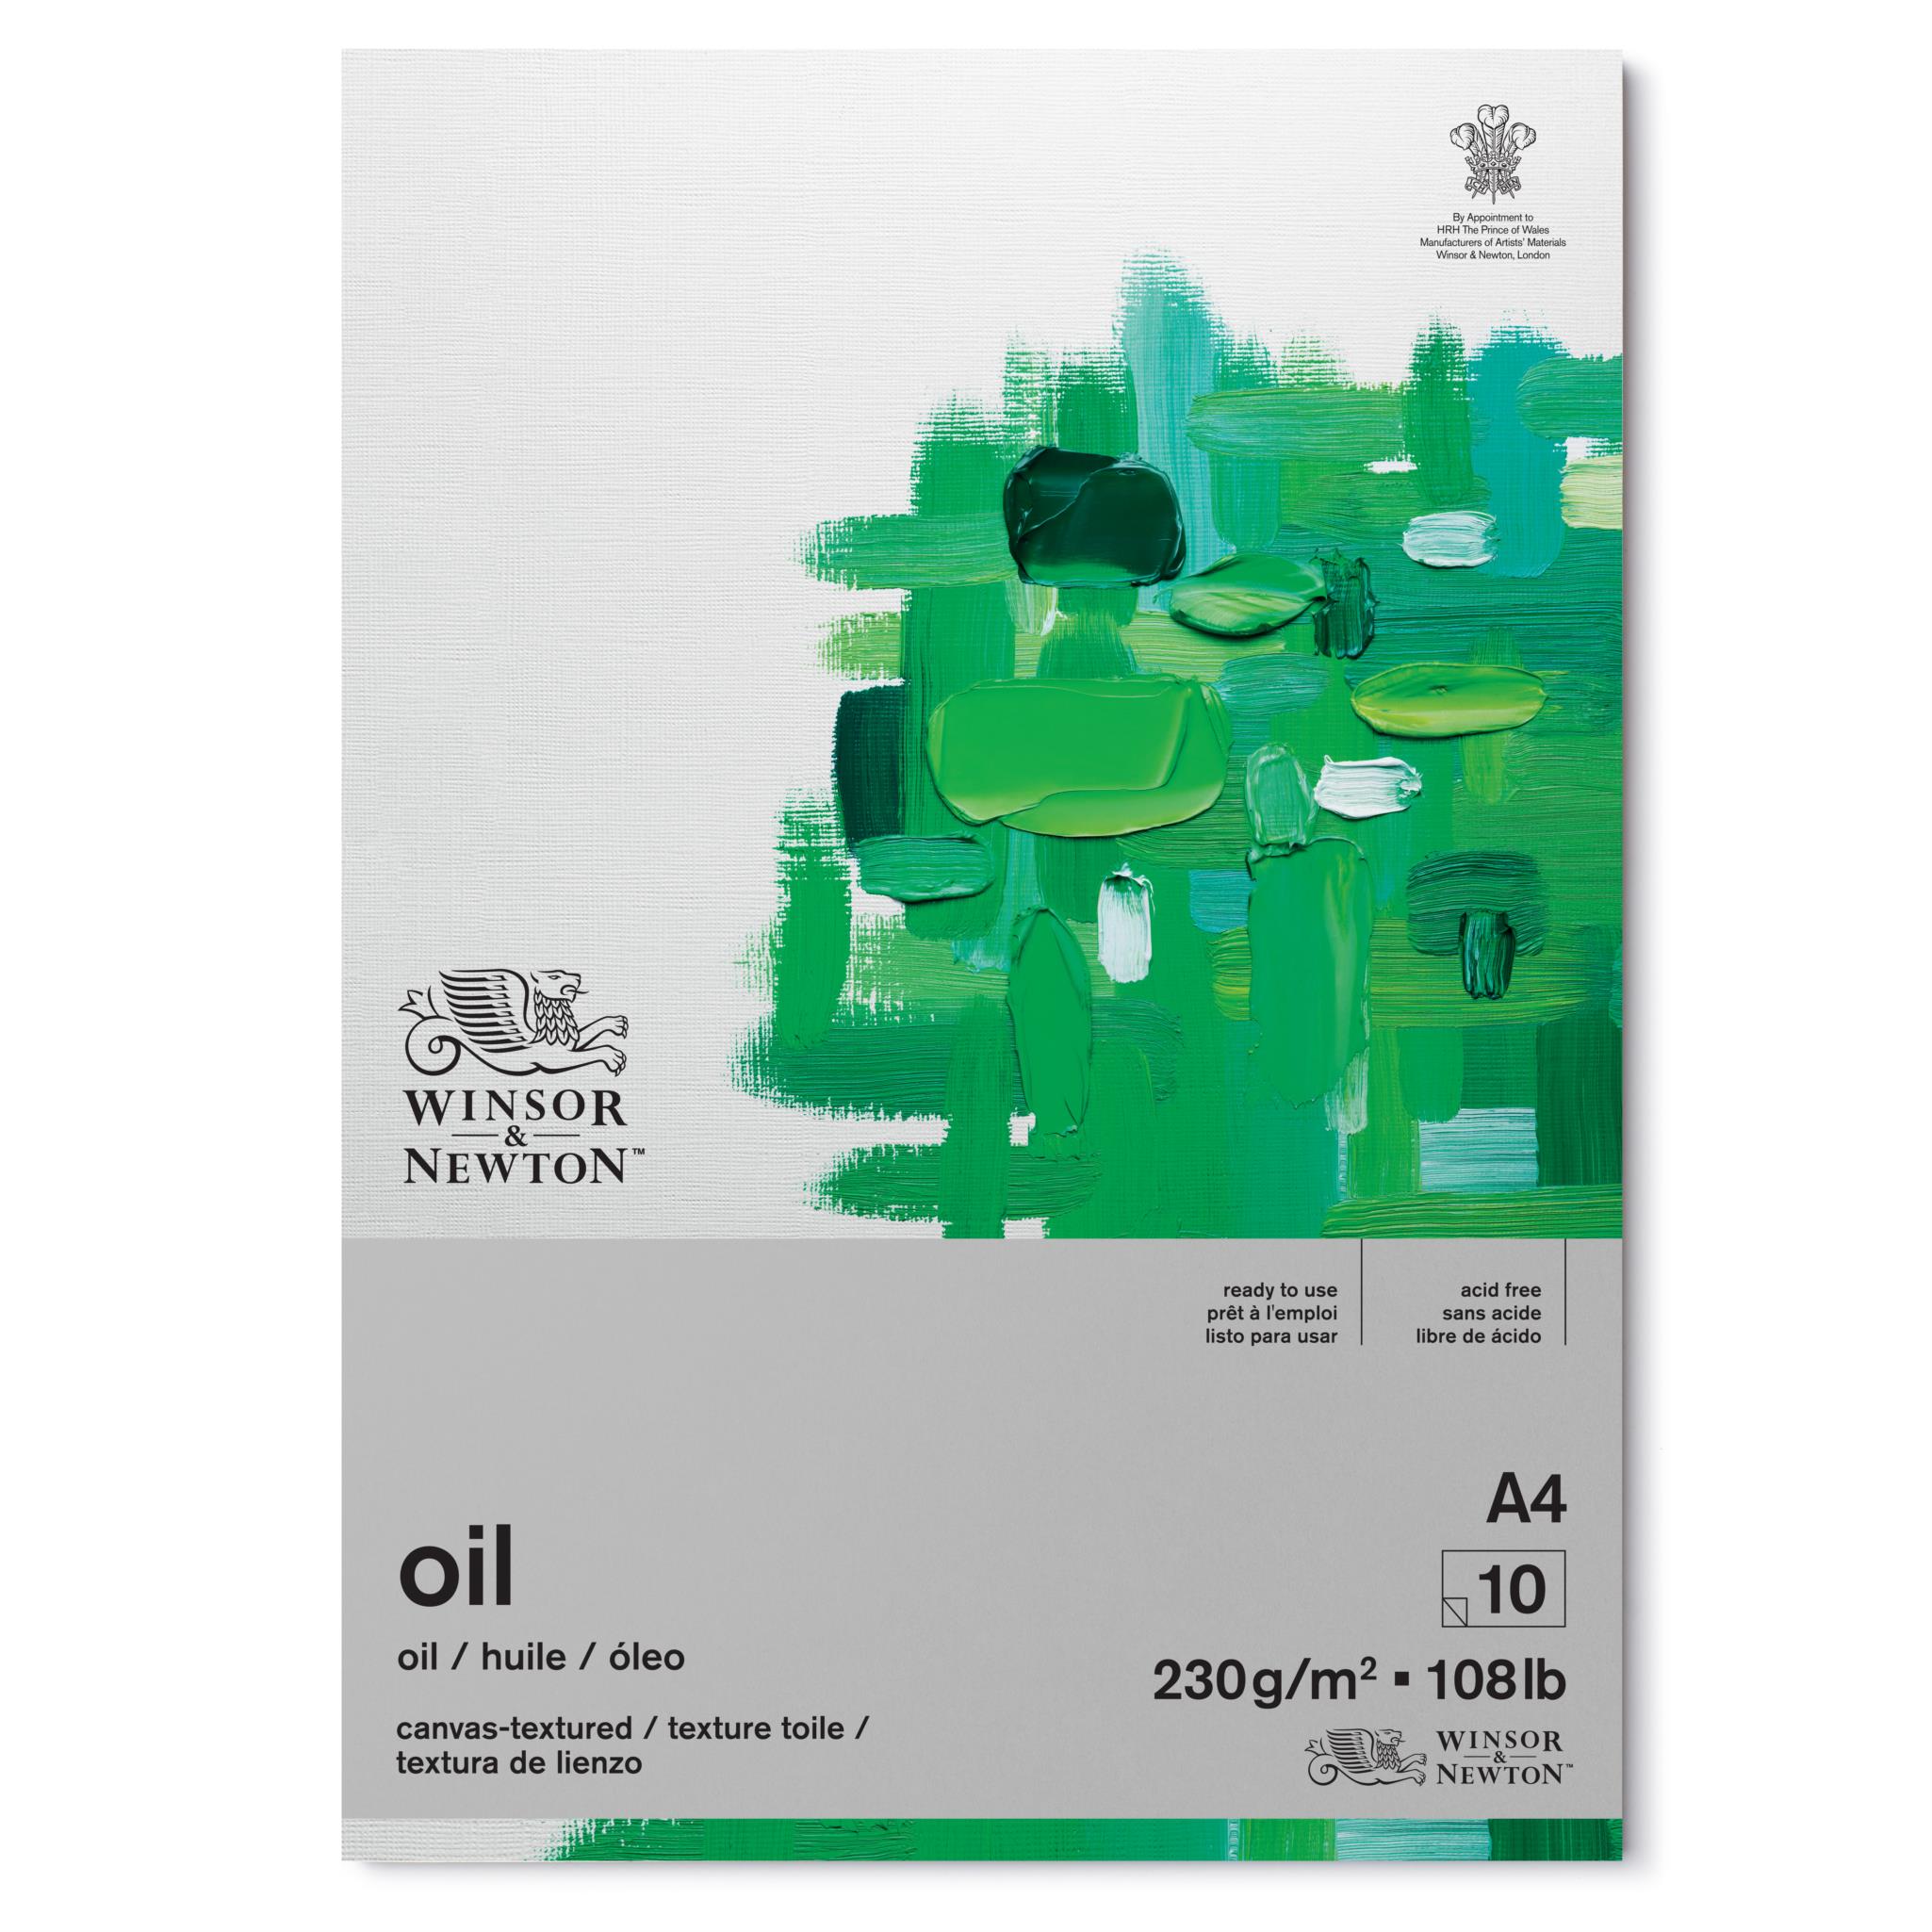 WINSOR & NEWTON OIL PAD 10 SHEETS OF A4